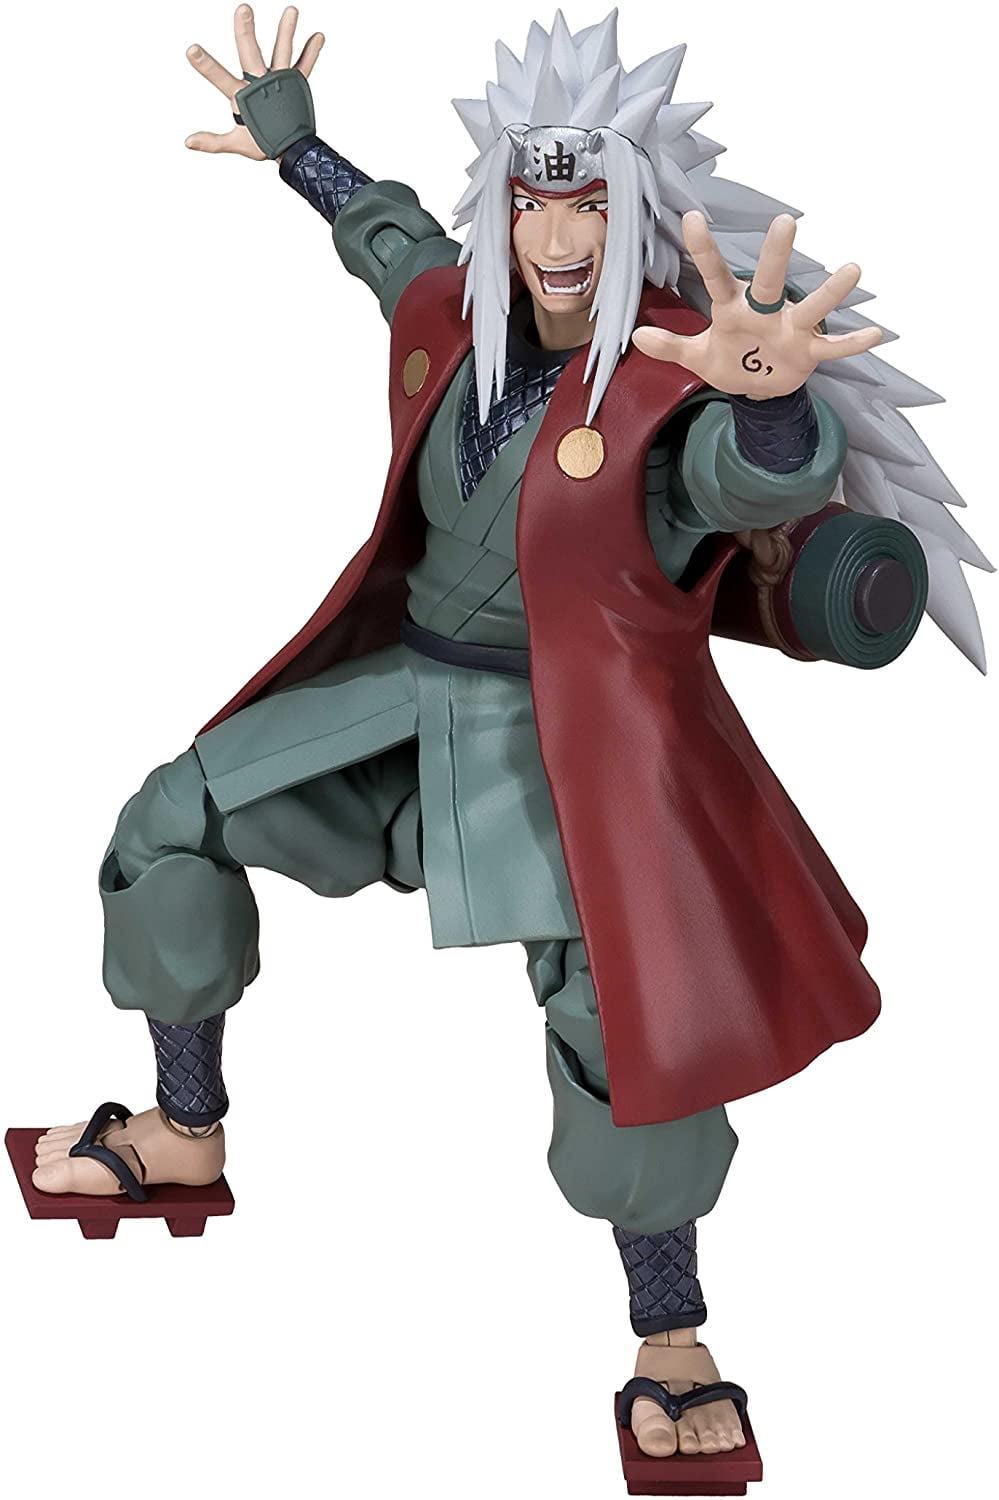  Action Figure Jiraiya Anime Figure Figurine Character Model  Statue Desktop Ornaments Collectibles Toys for Kids ,XR122 